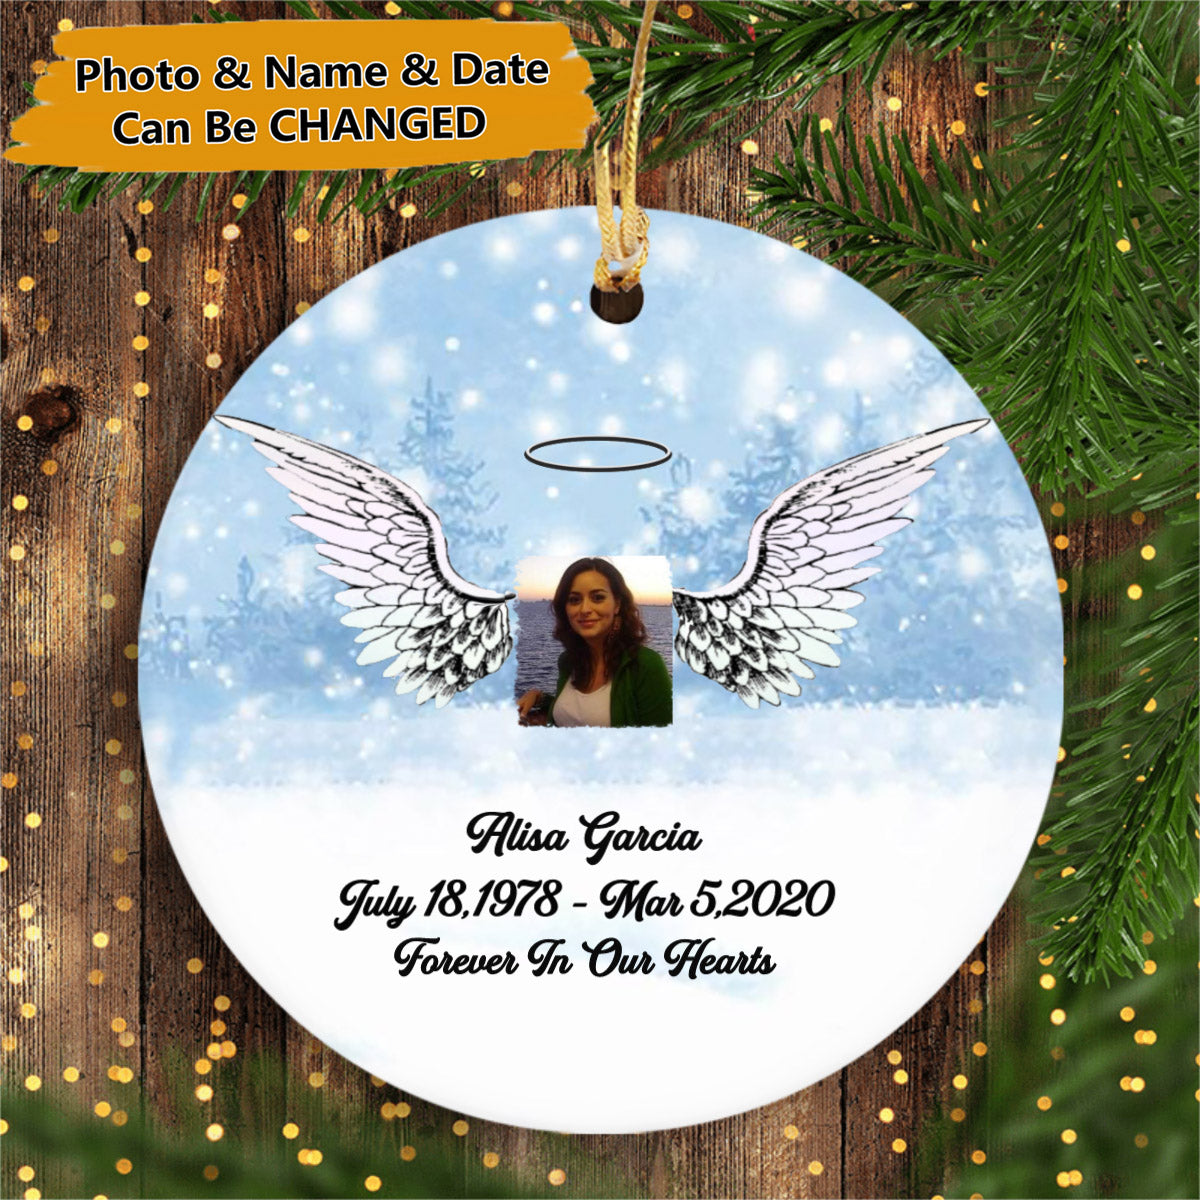 Personalized Photo and Name Memorial Circle Ornaments